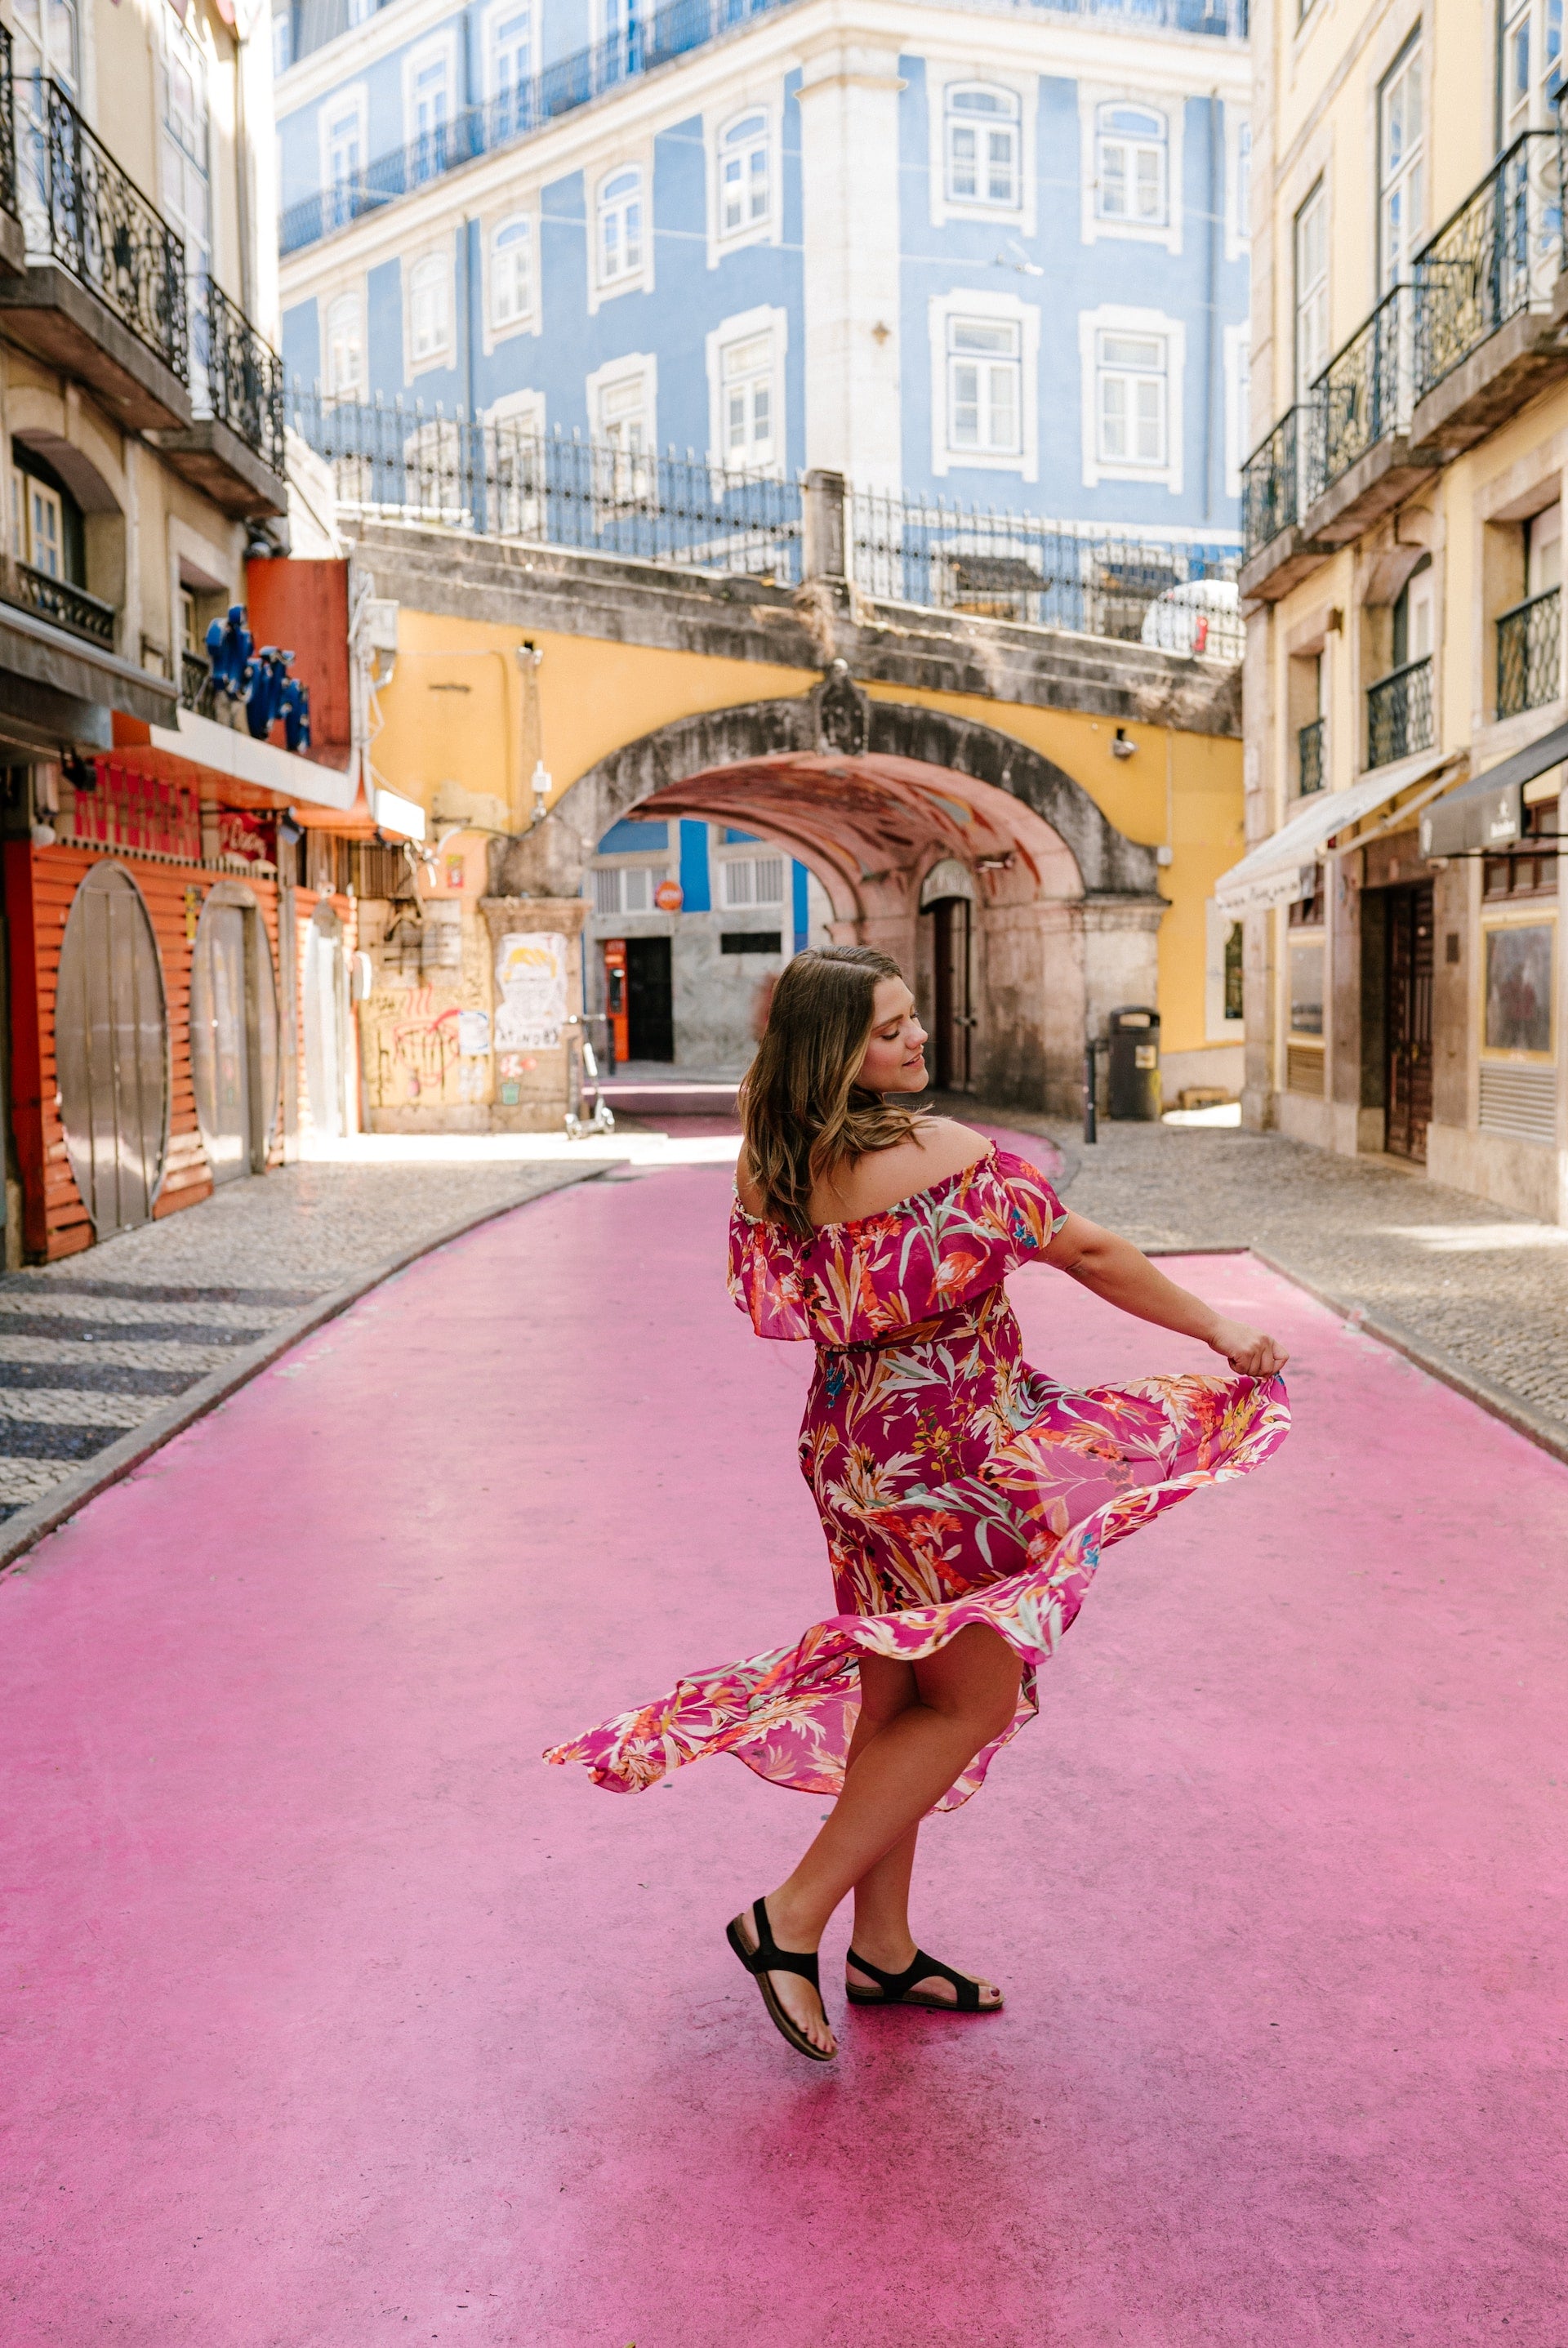 A woman twirling in a pink dress on a matching pink street